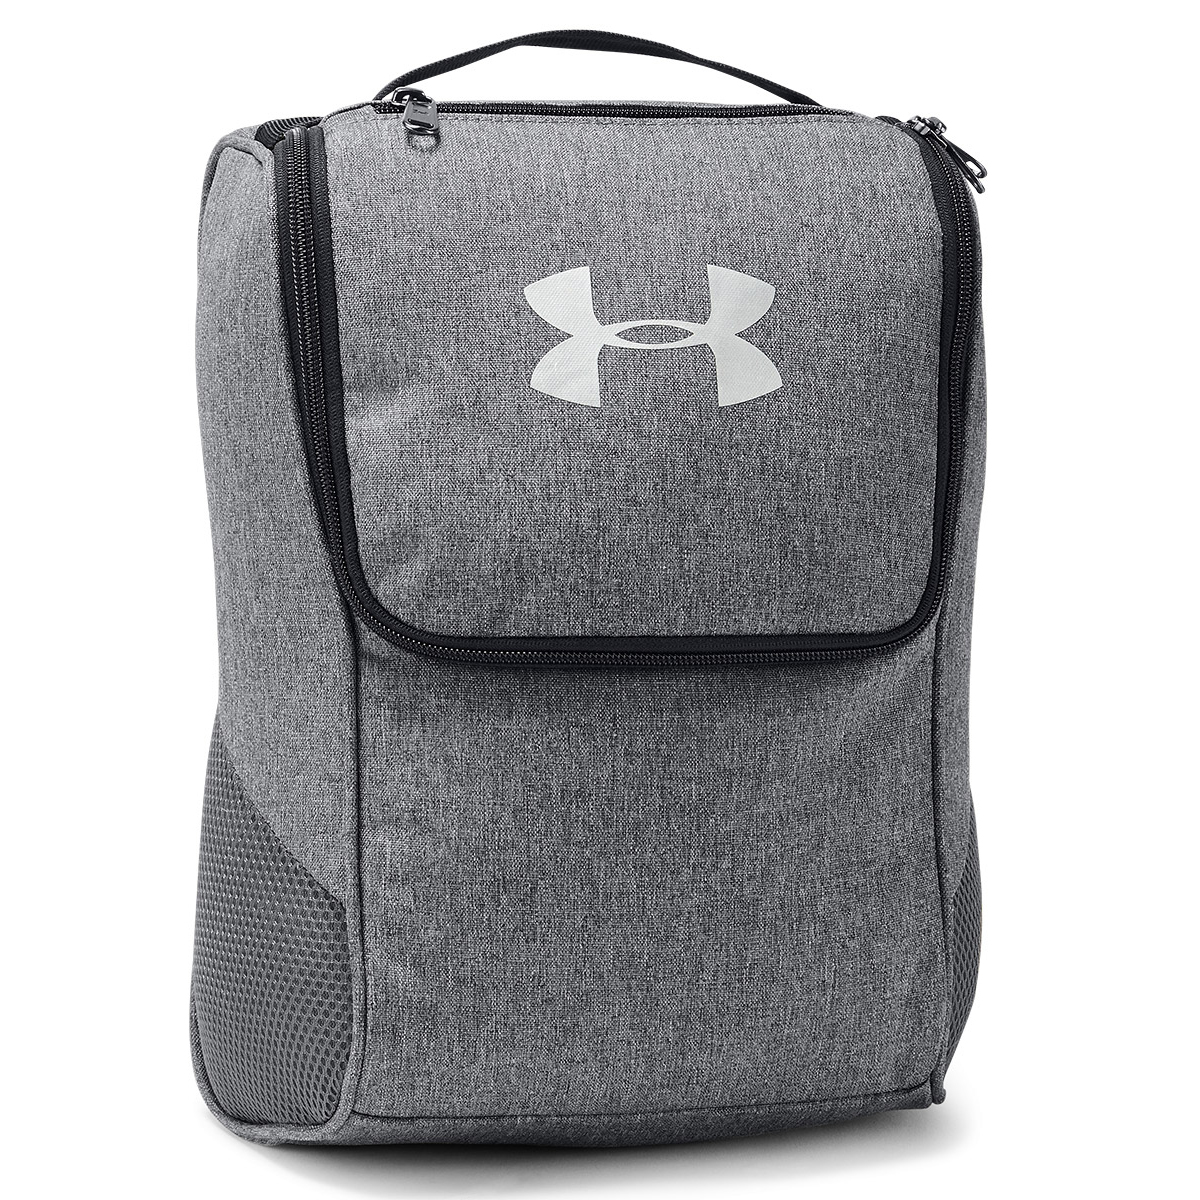 Under Armour Shoe Bag from american golf